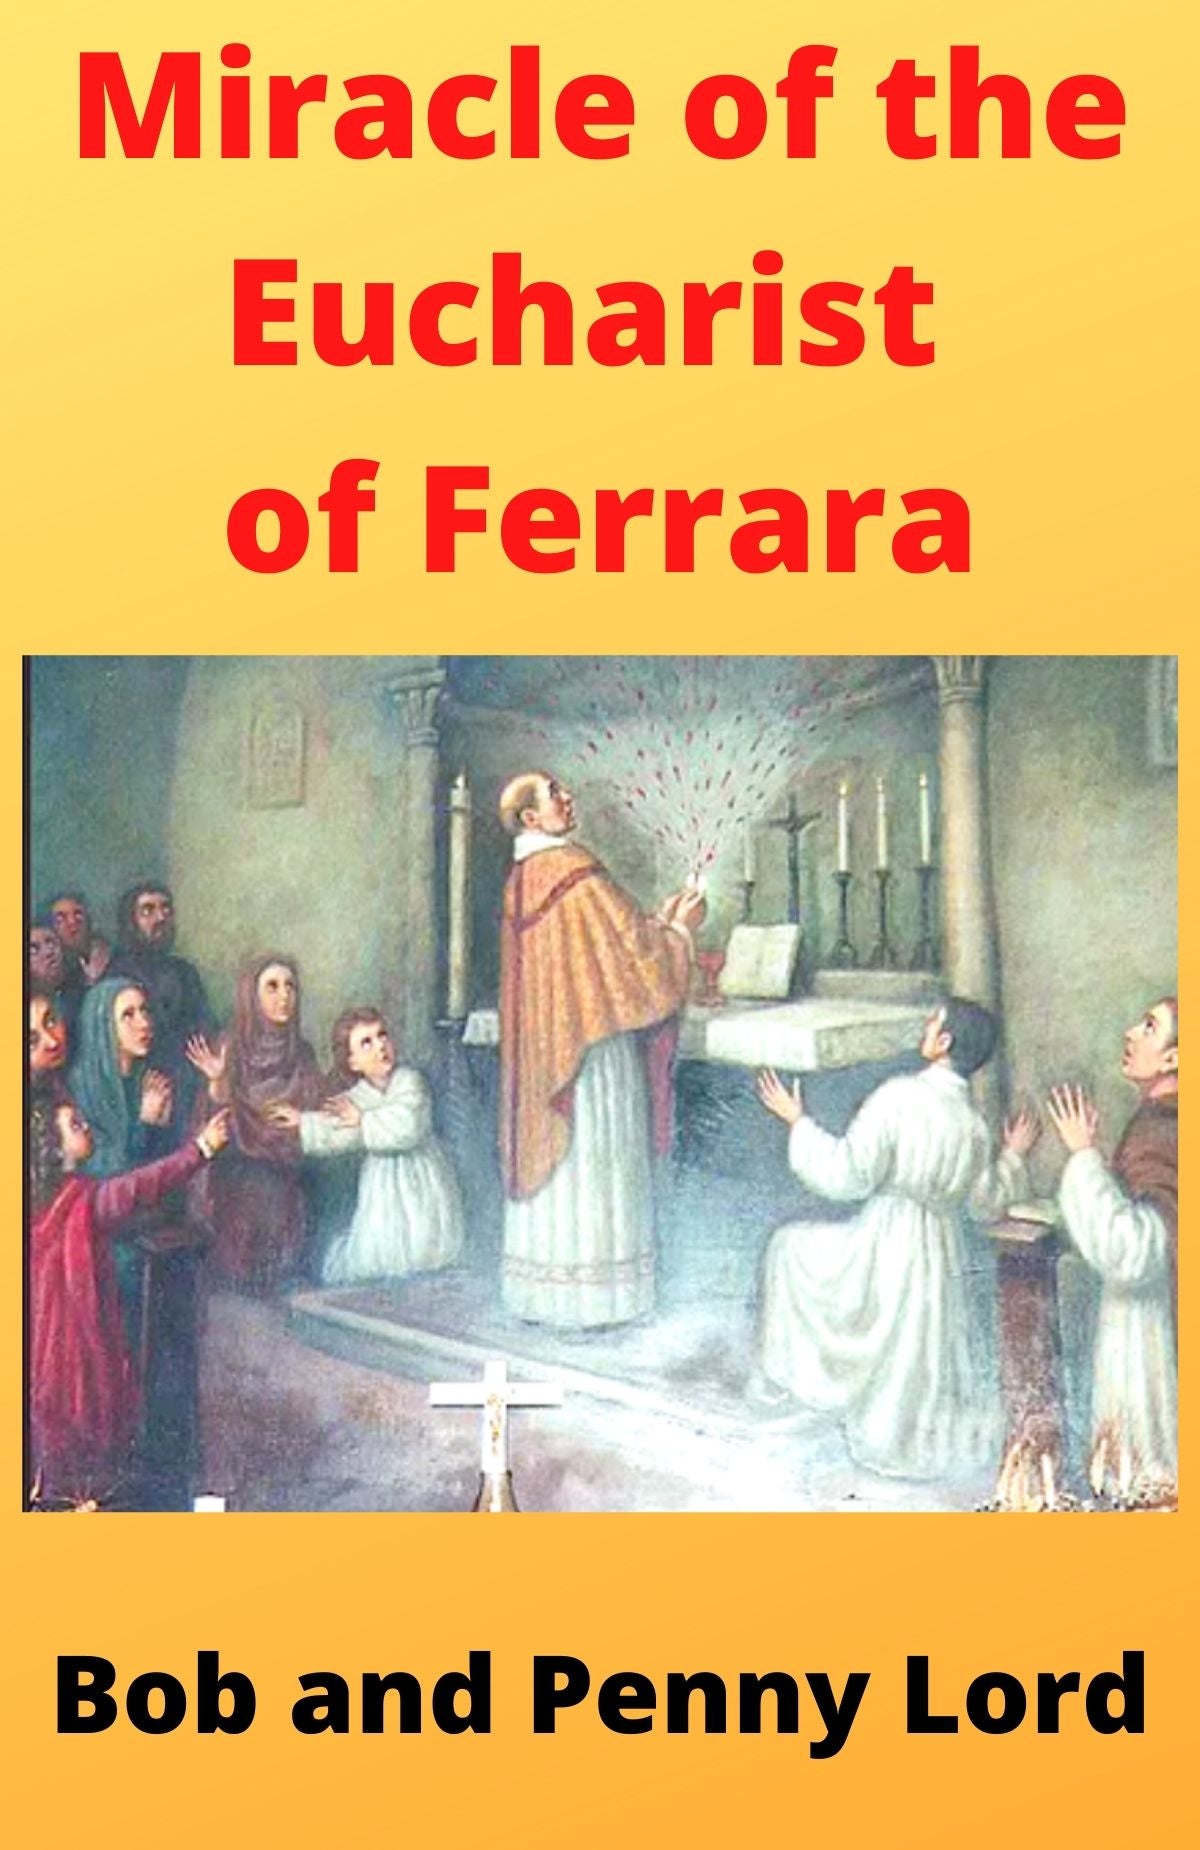 Miracles of the Eucharist Book I MP4 Download - Bob and Penny Lord